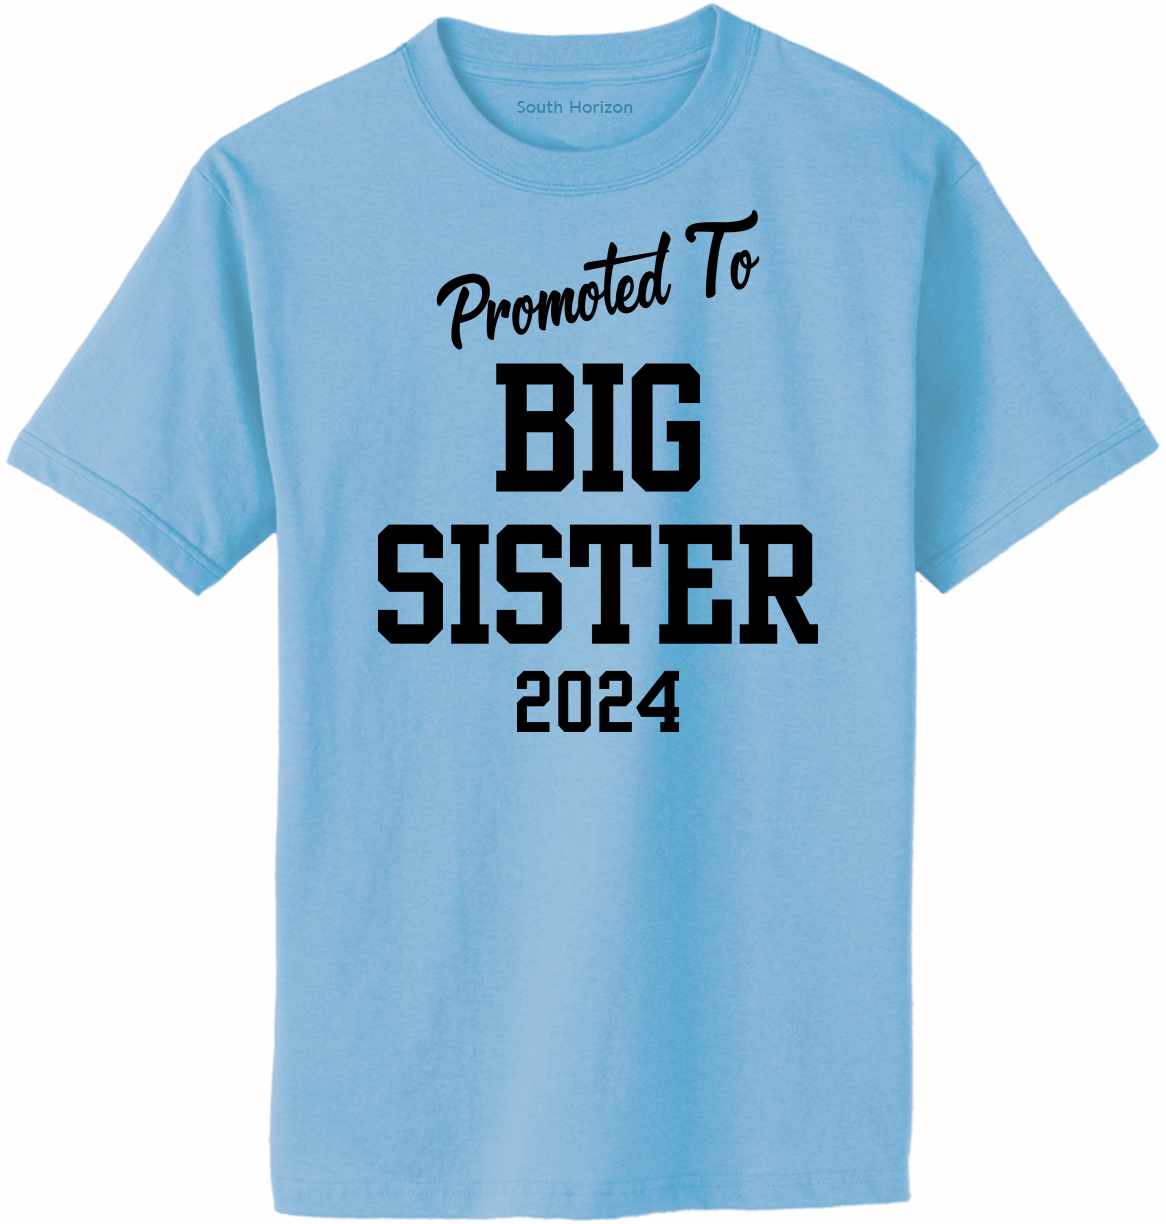 Promoted to Big Sister 2024 on Adult T-Shirt (#1364-1)